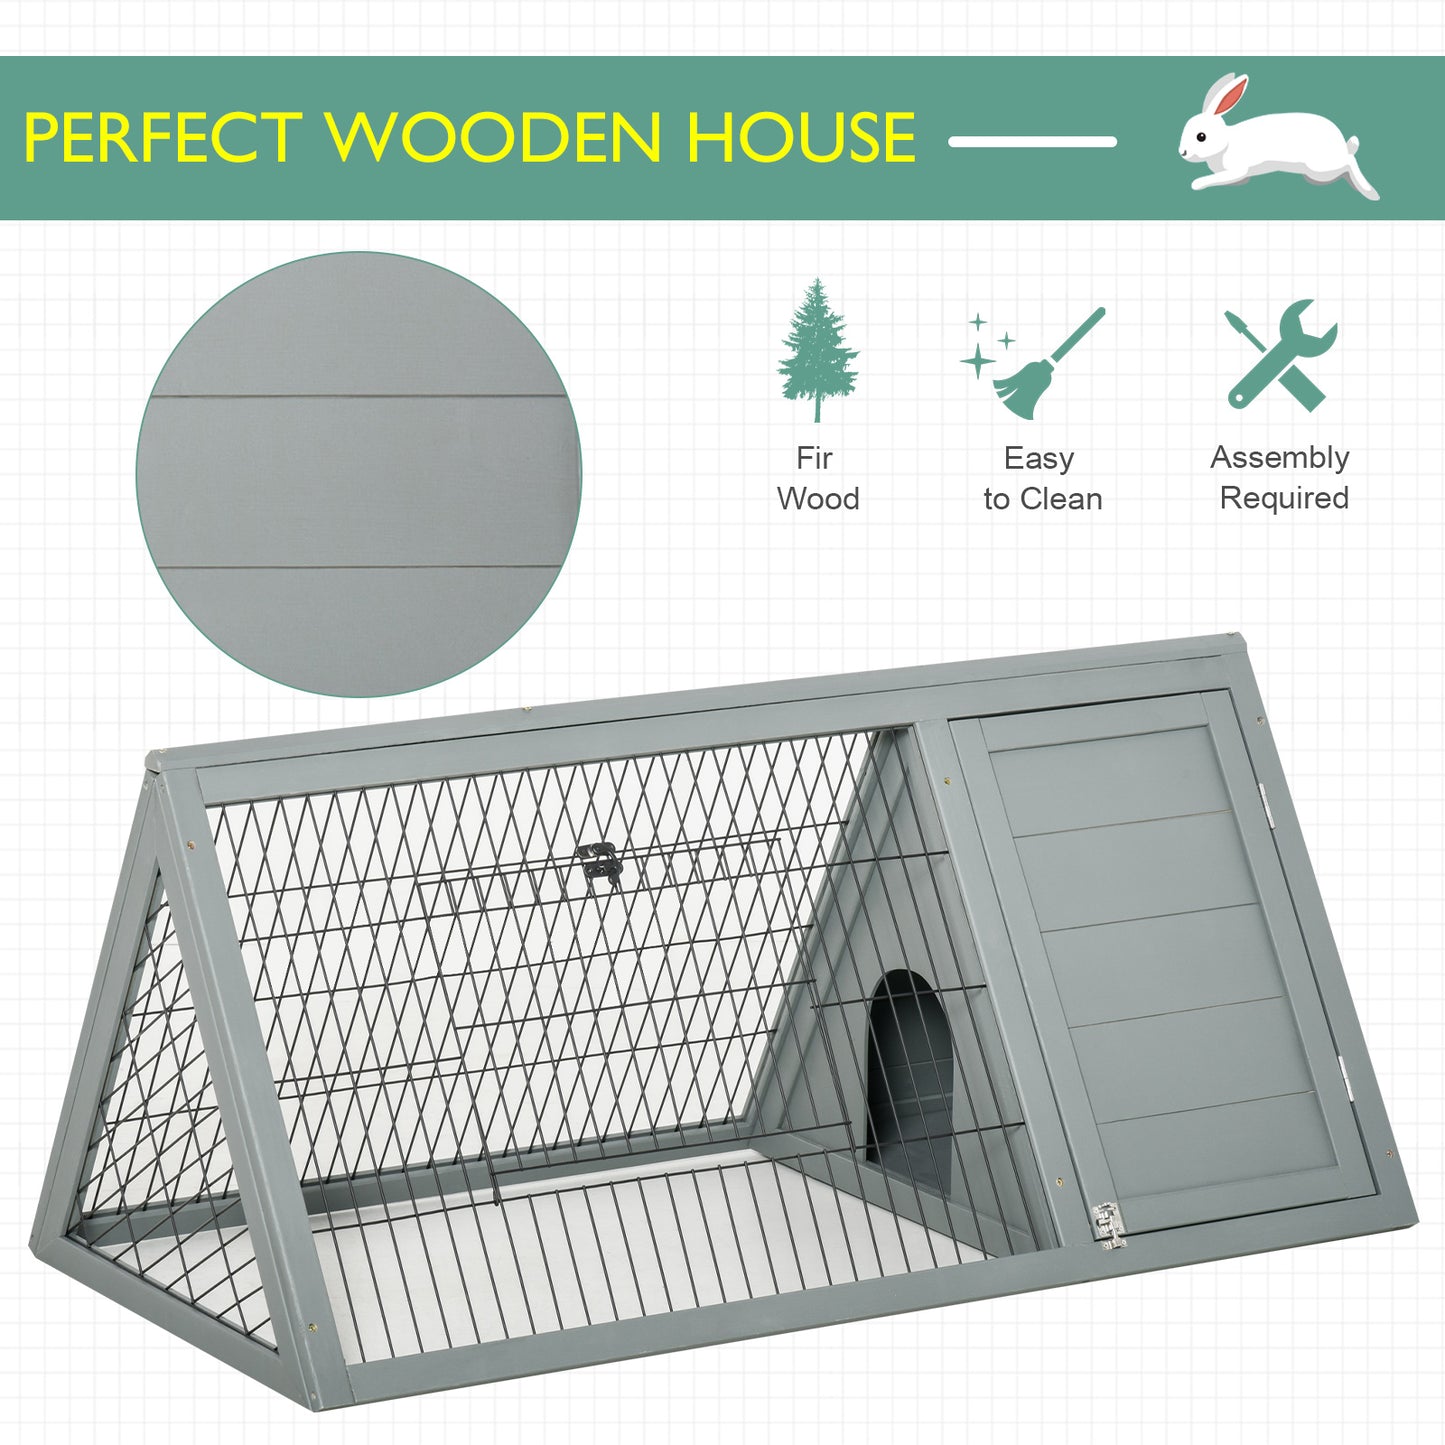 PawHut Wooden Rabbit Cage Small Animal Hutch w/ Outside Area - Grey